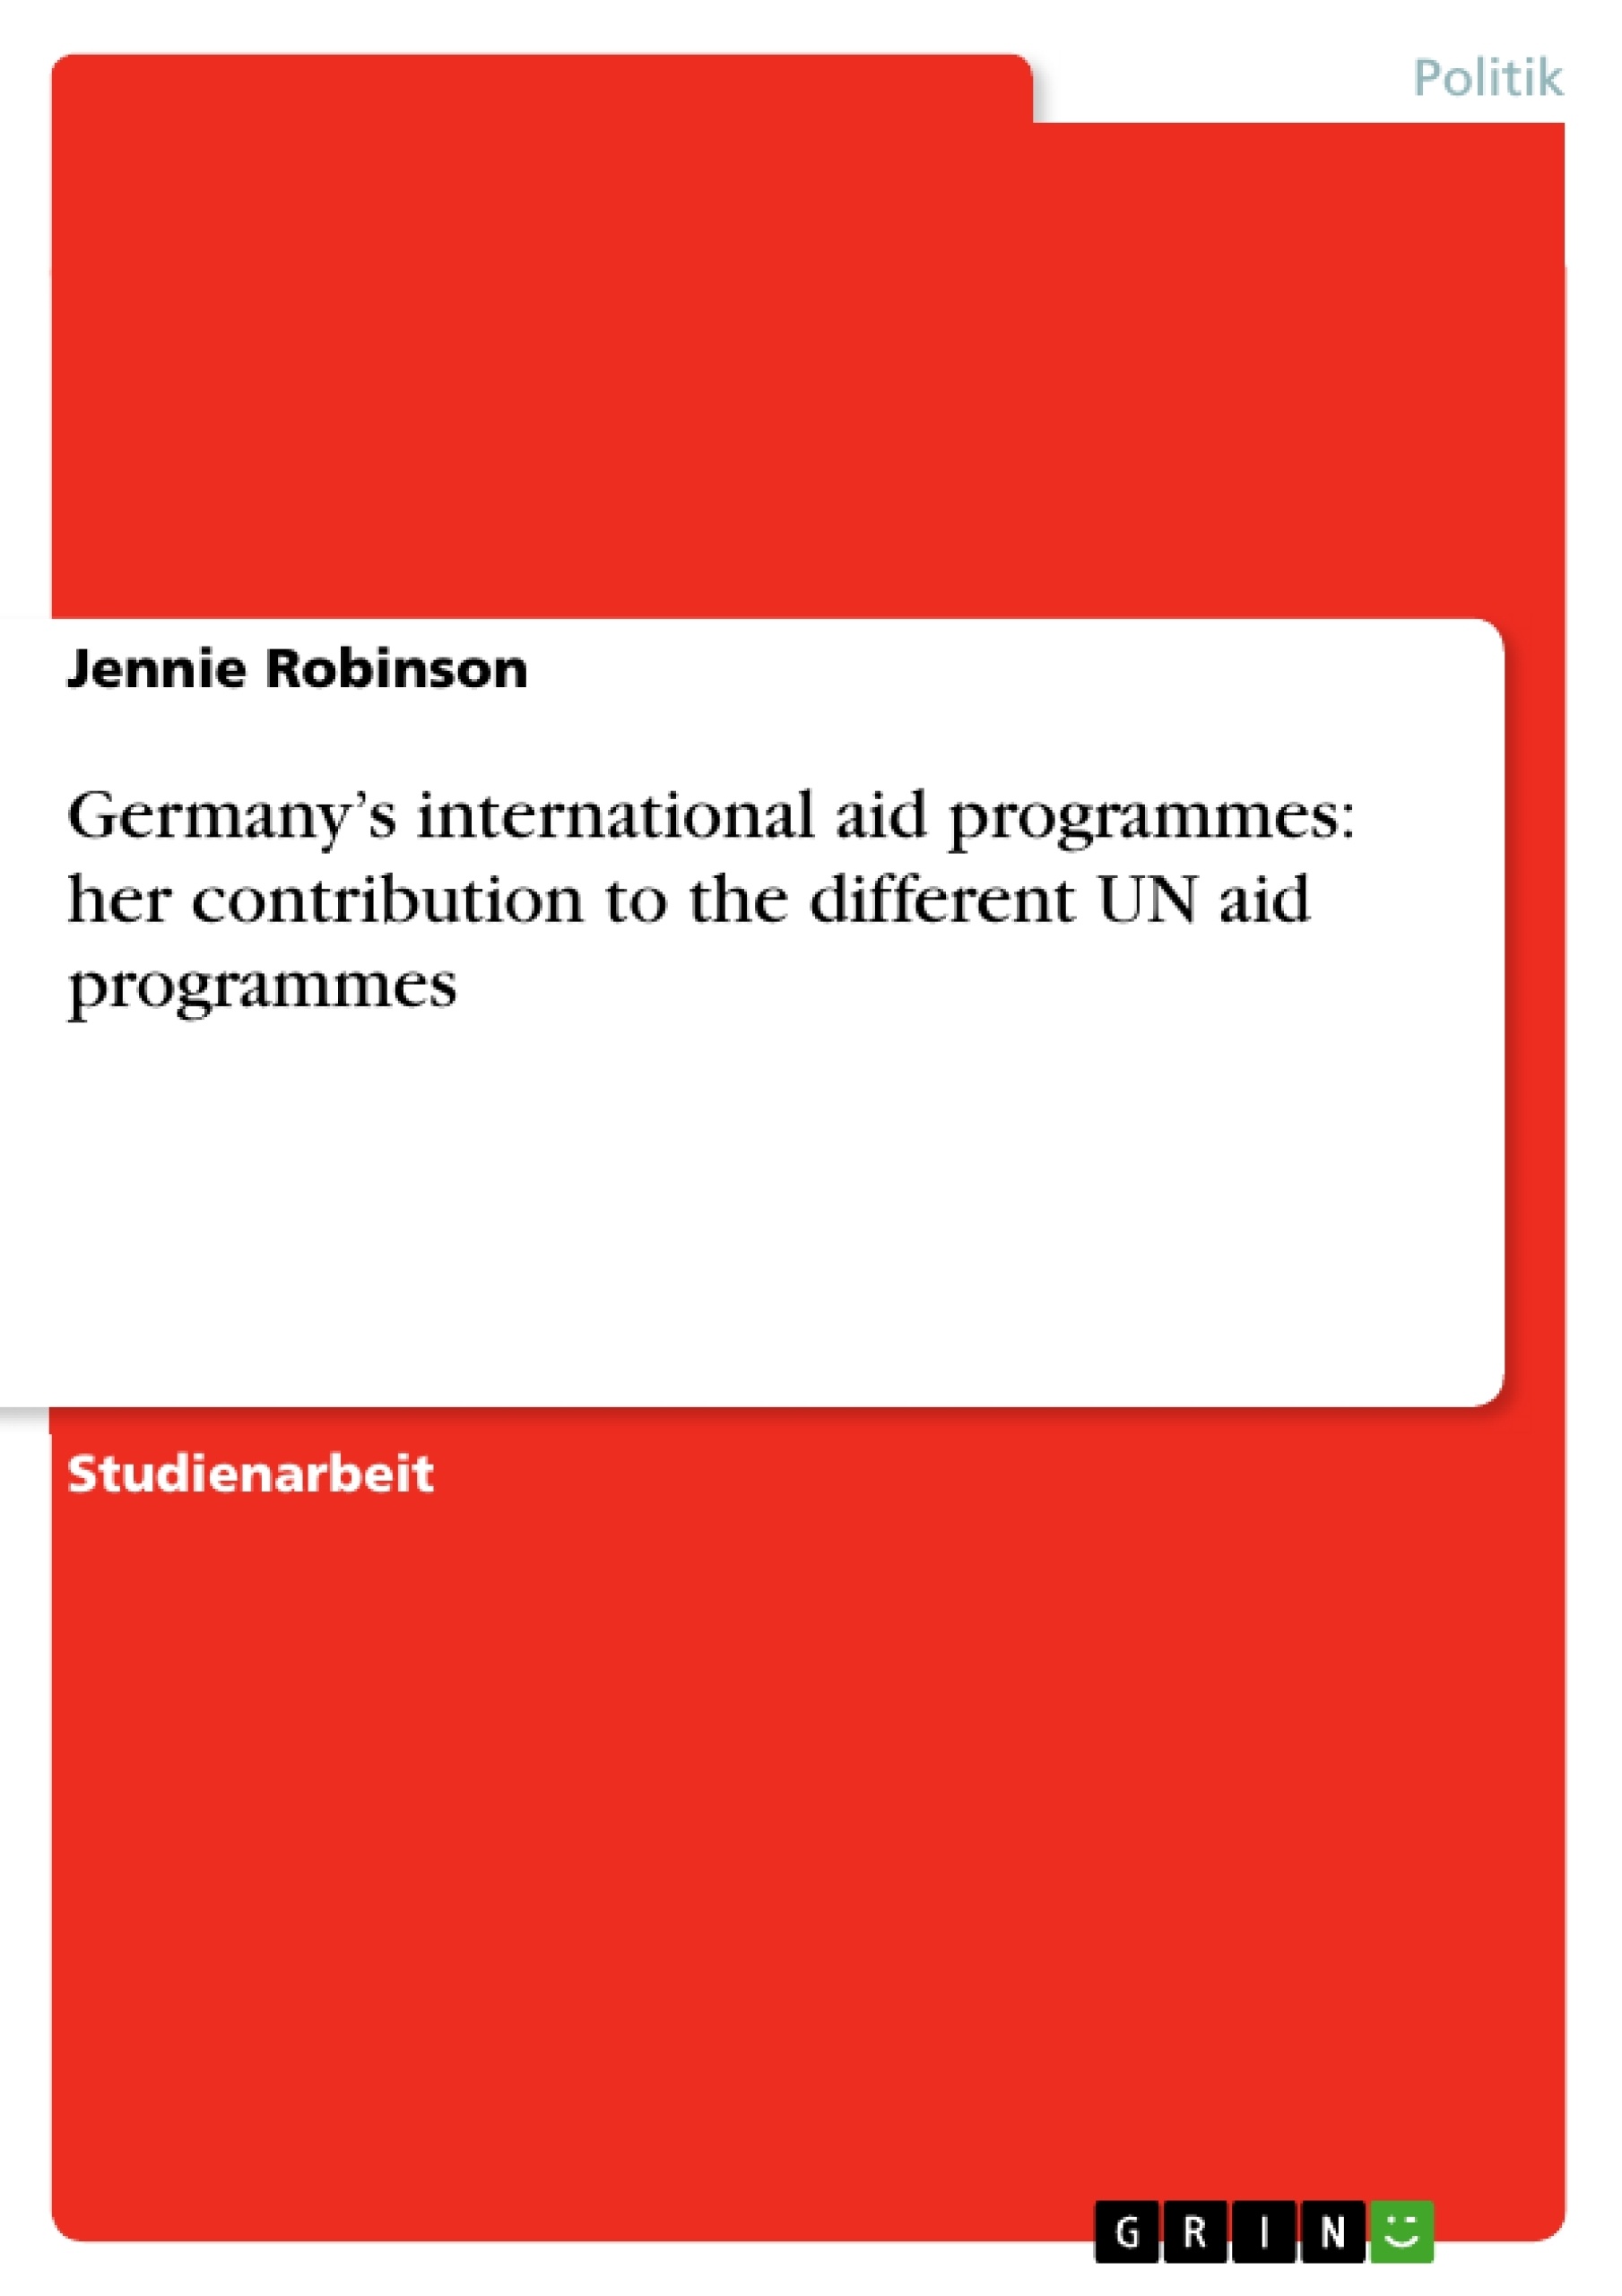 Title: Germany’s international aid programmes: her contribution to the different UN aid programmes